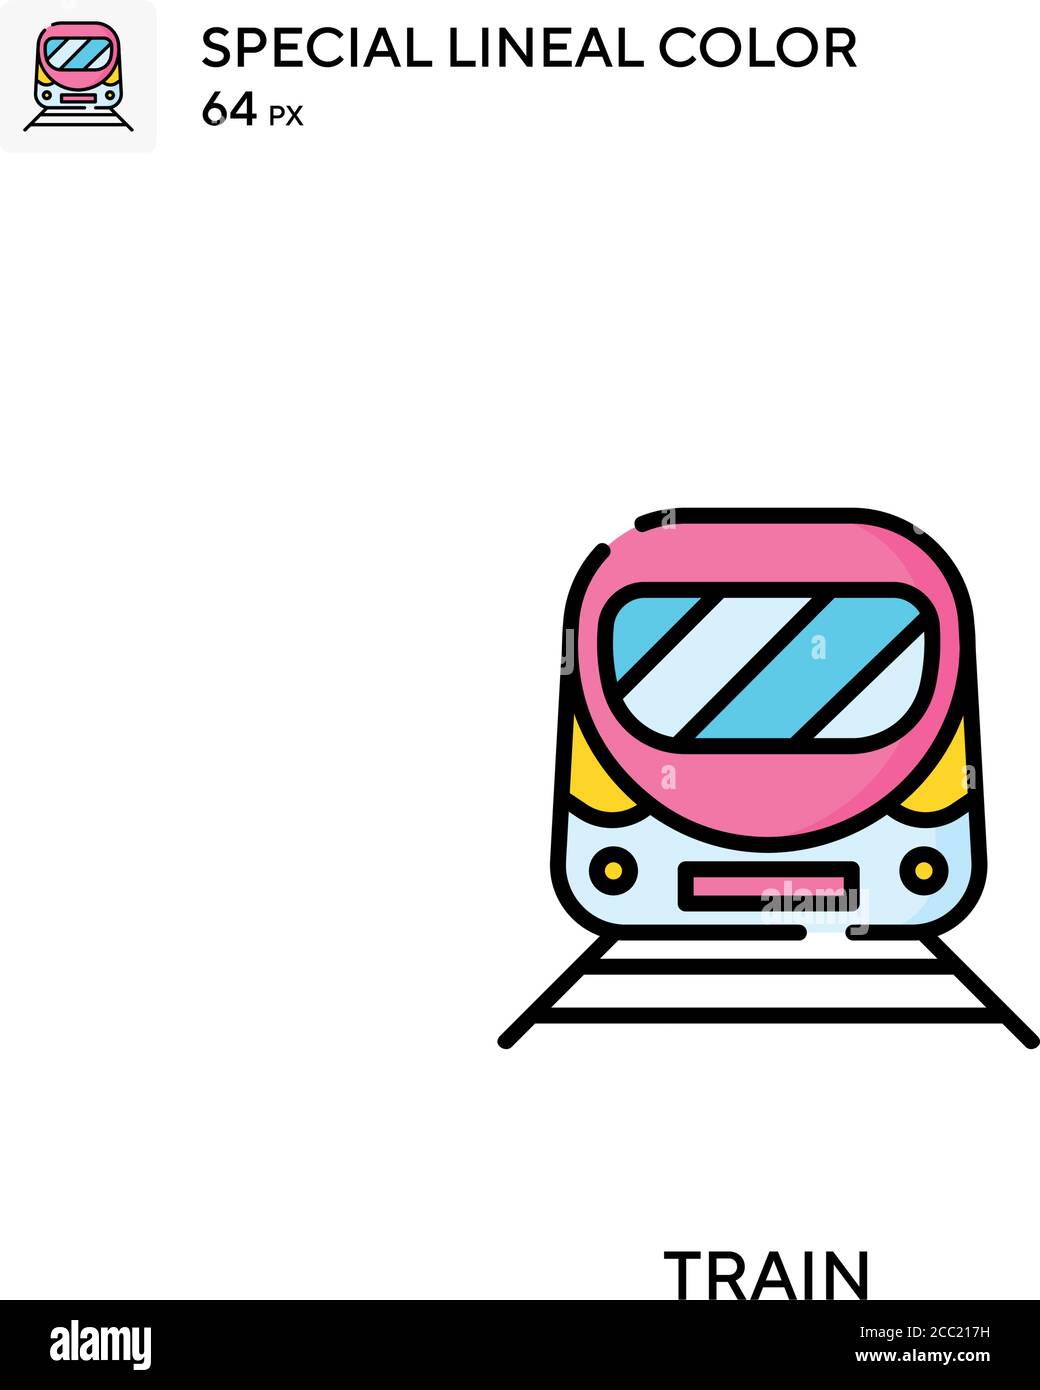 Train Special lineal color vector icon. Train icons for your business project Stock Vector